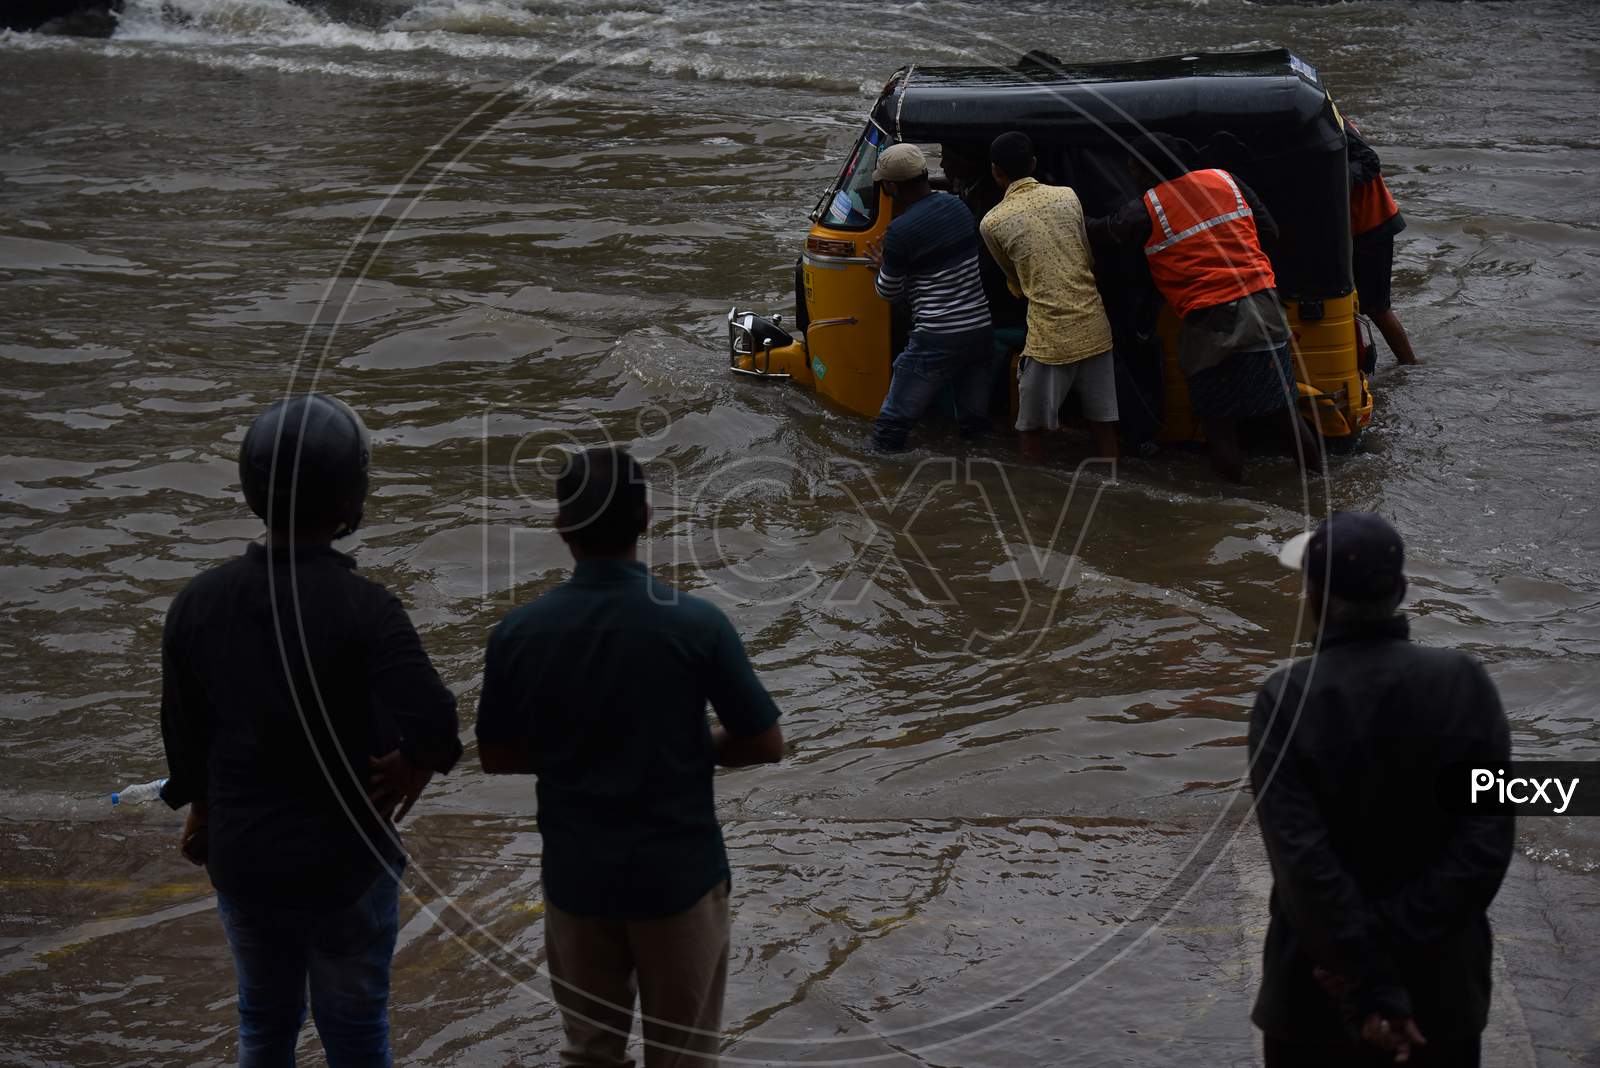 GHMC workers and passers by try to push an auto that got stuck in the rain water in Tolichowki,Hyderabad on October 14, 2020.